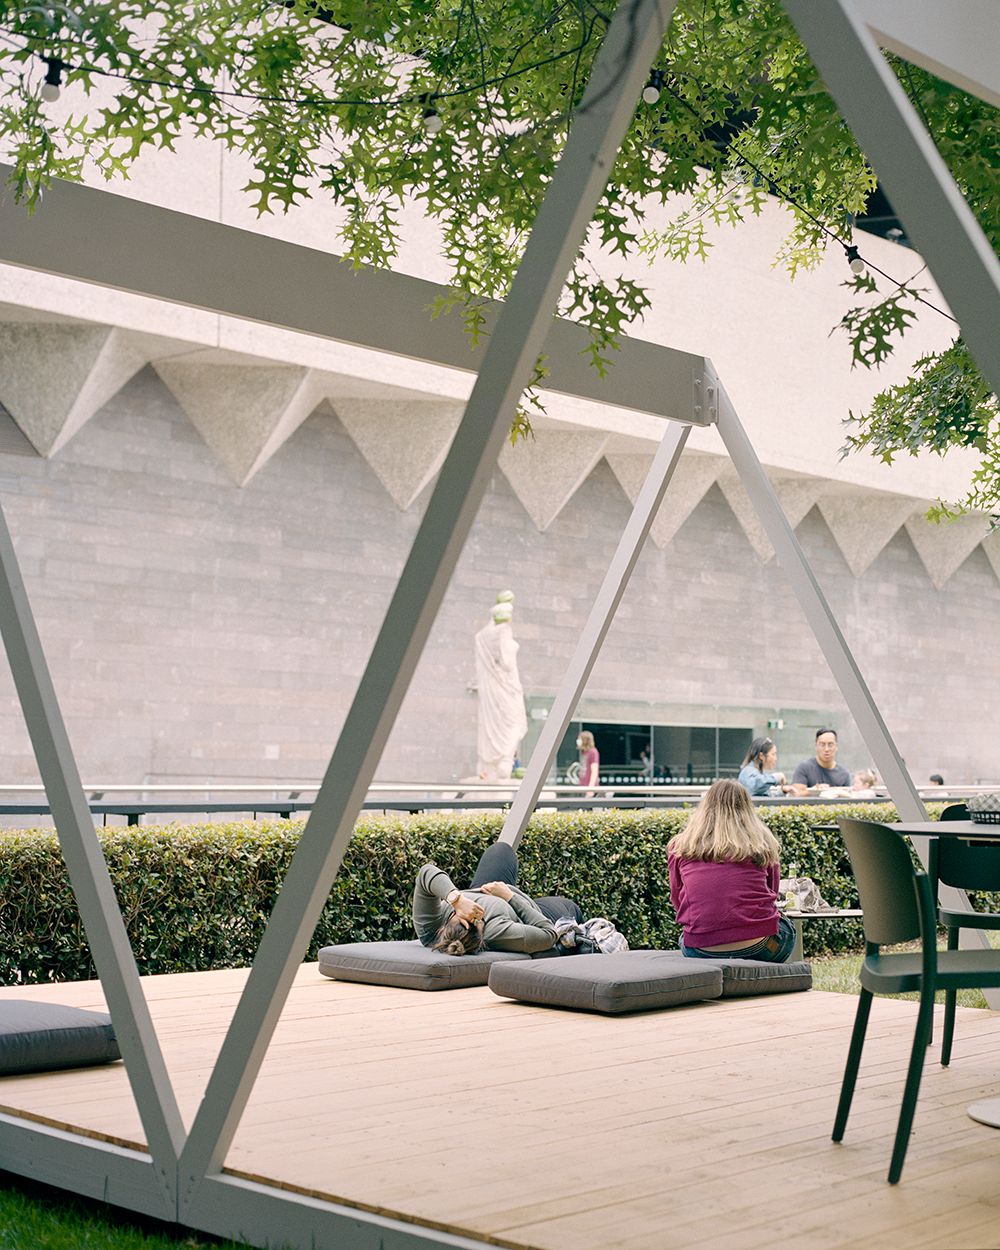 NGV Outdoor Dining Pavilions – 04